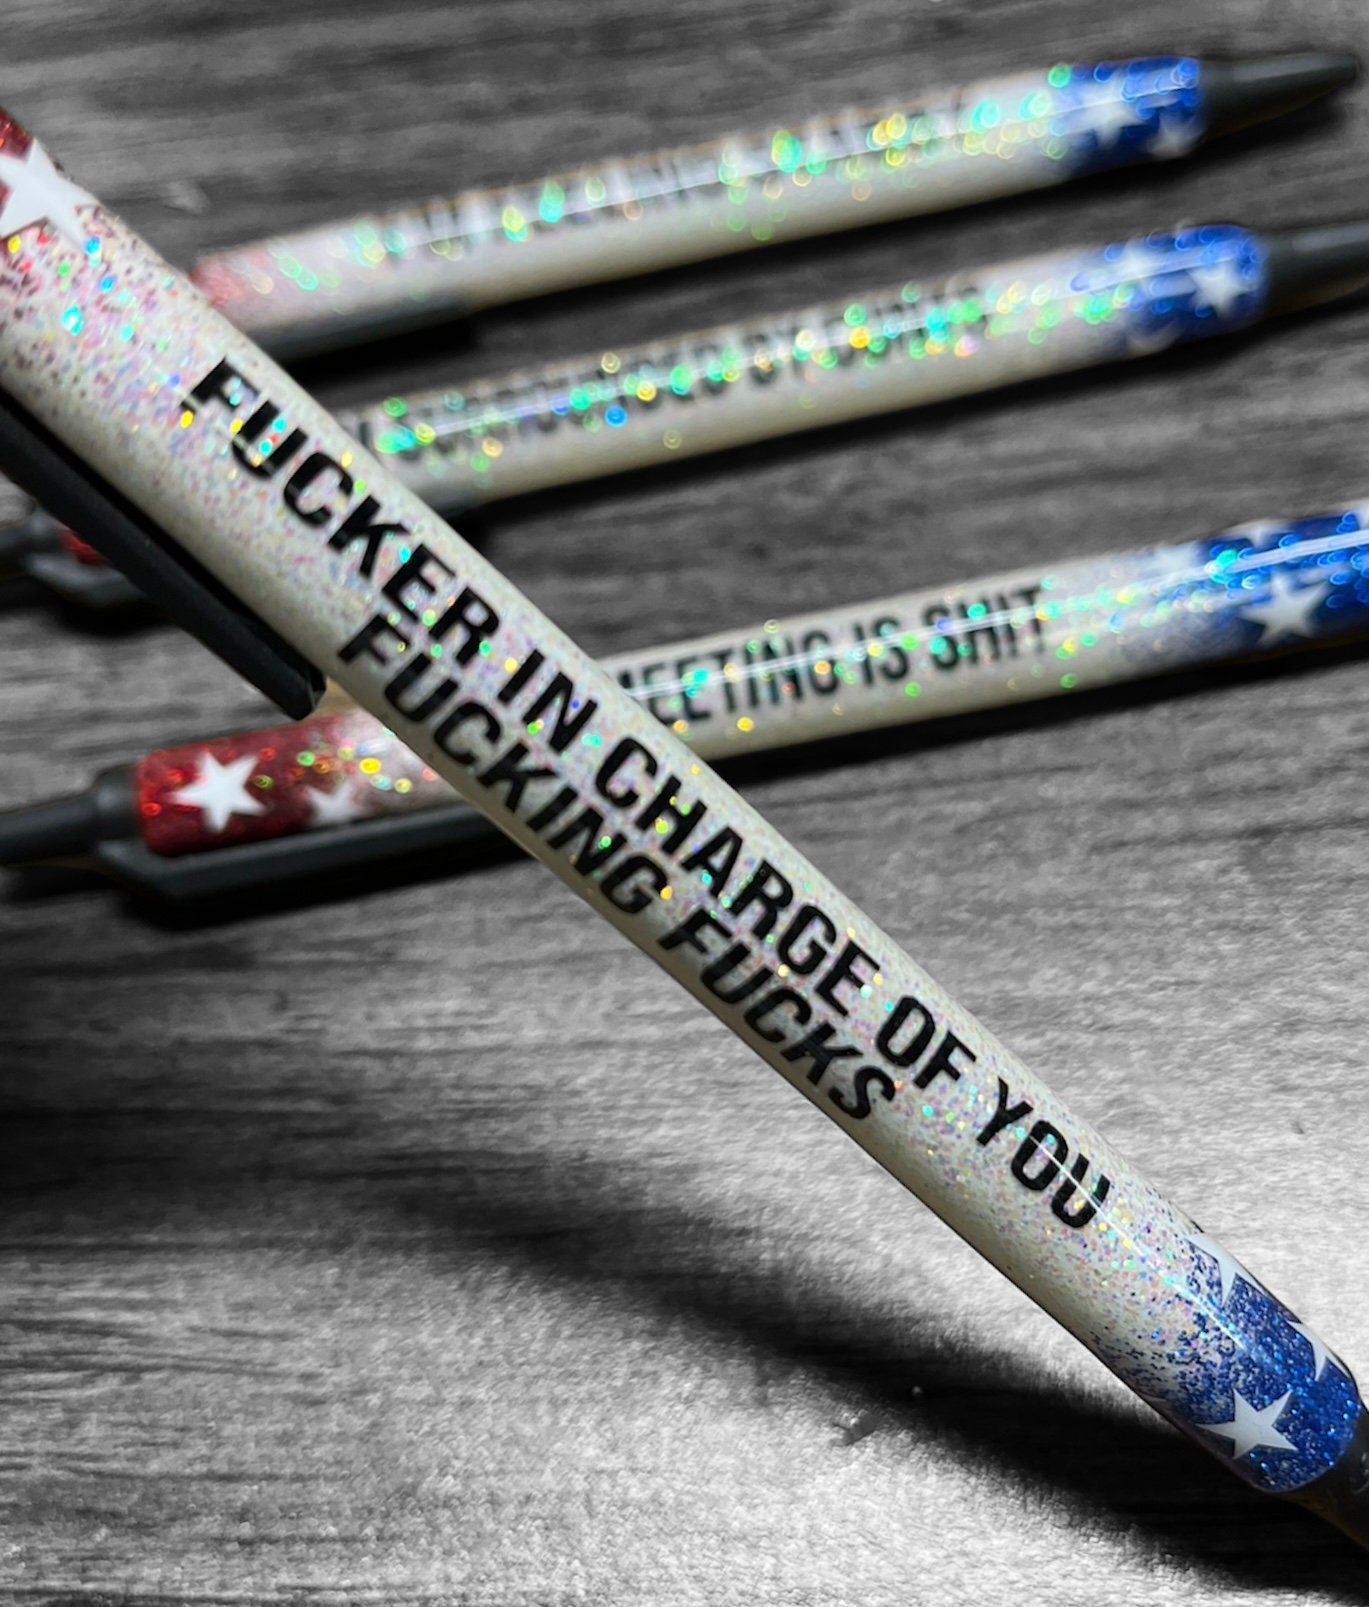 Glitter pens, funny saying pens, patriotic funny pens, gag gift, stocking stuffers, Christmas ideas, holidays 2021,